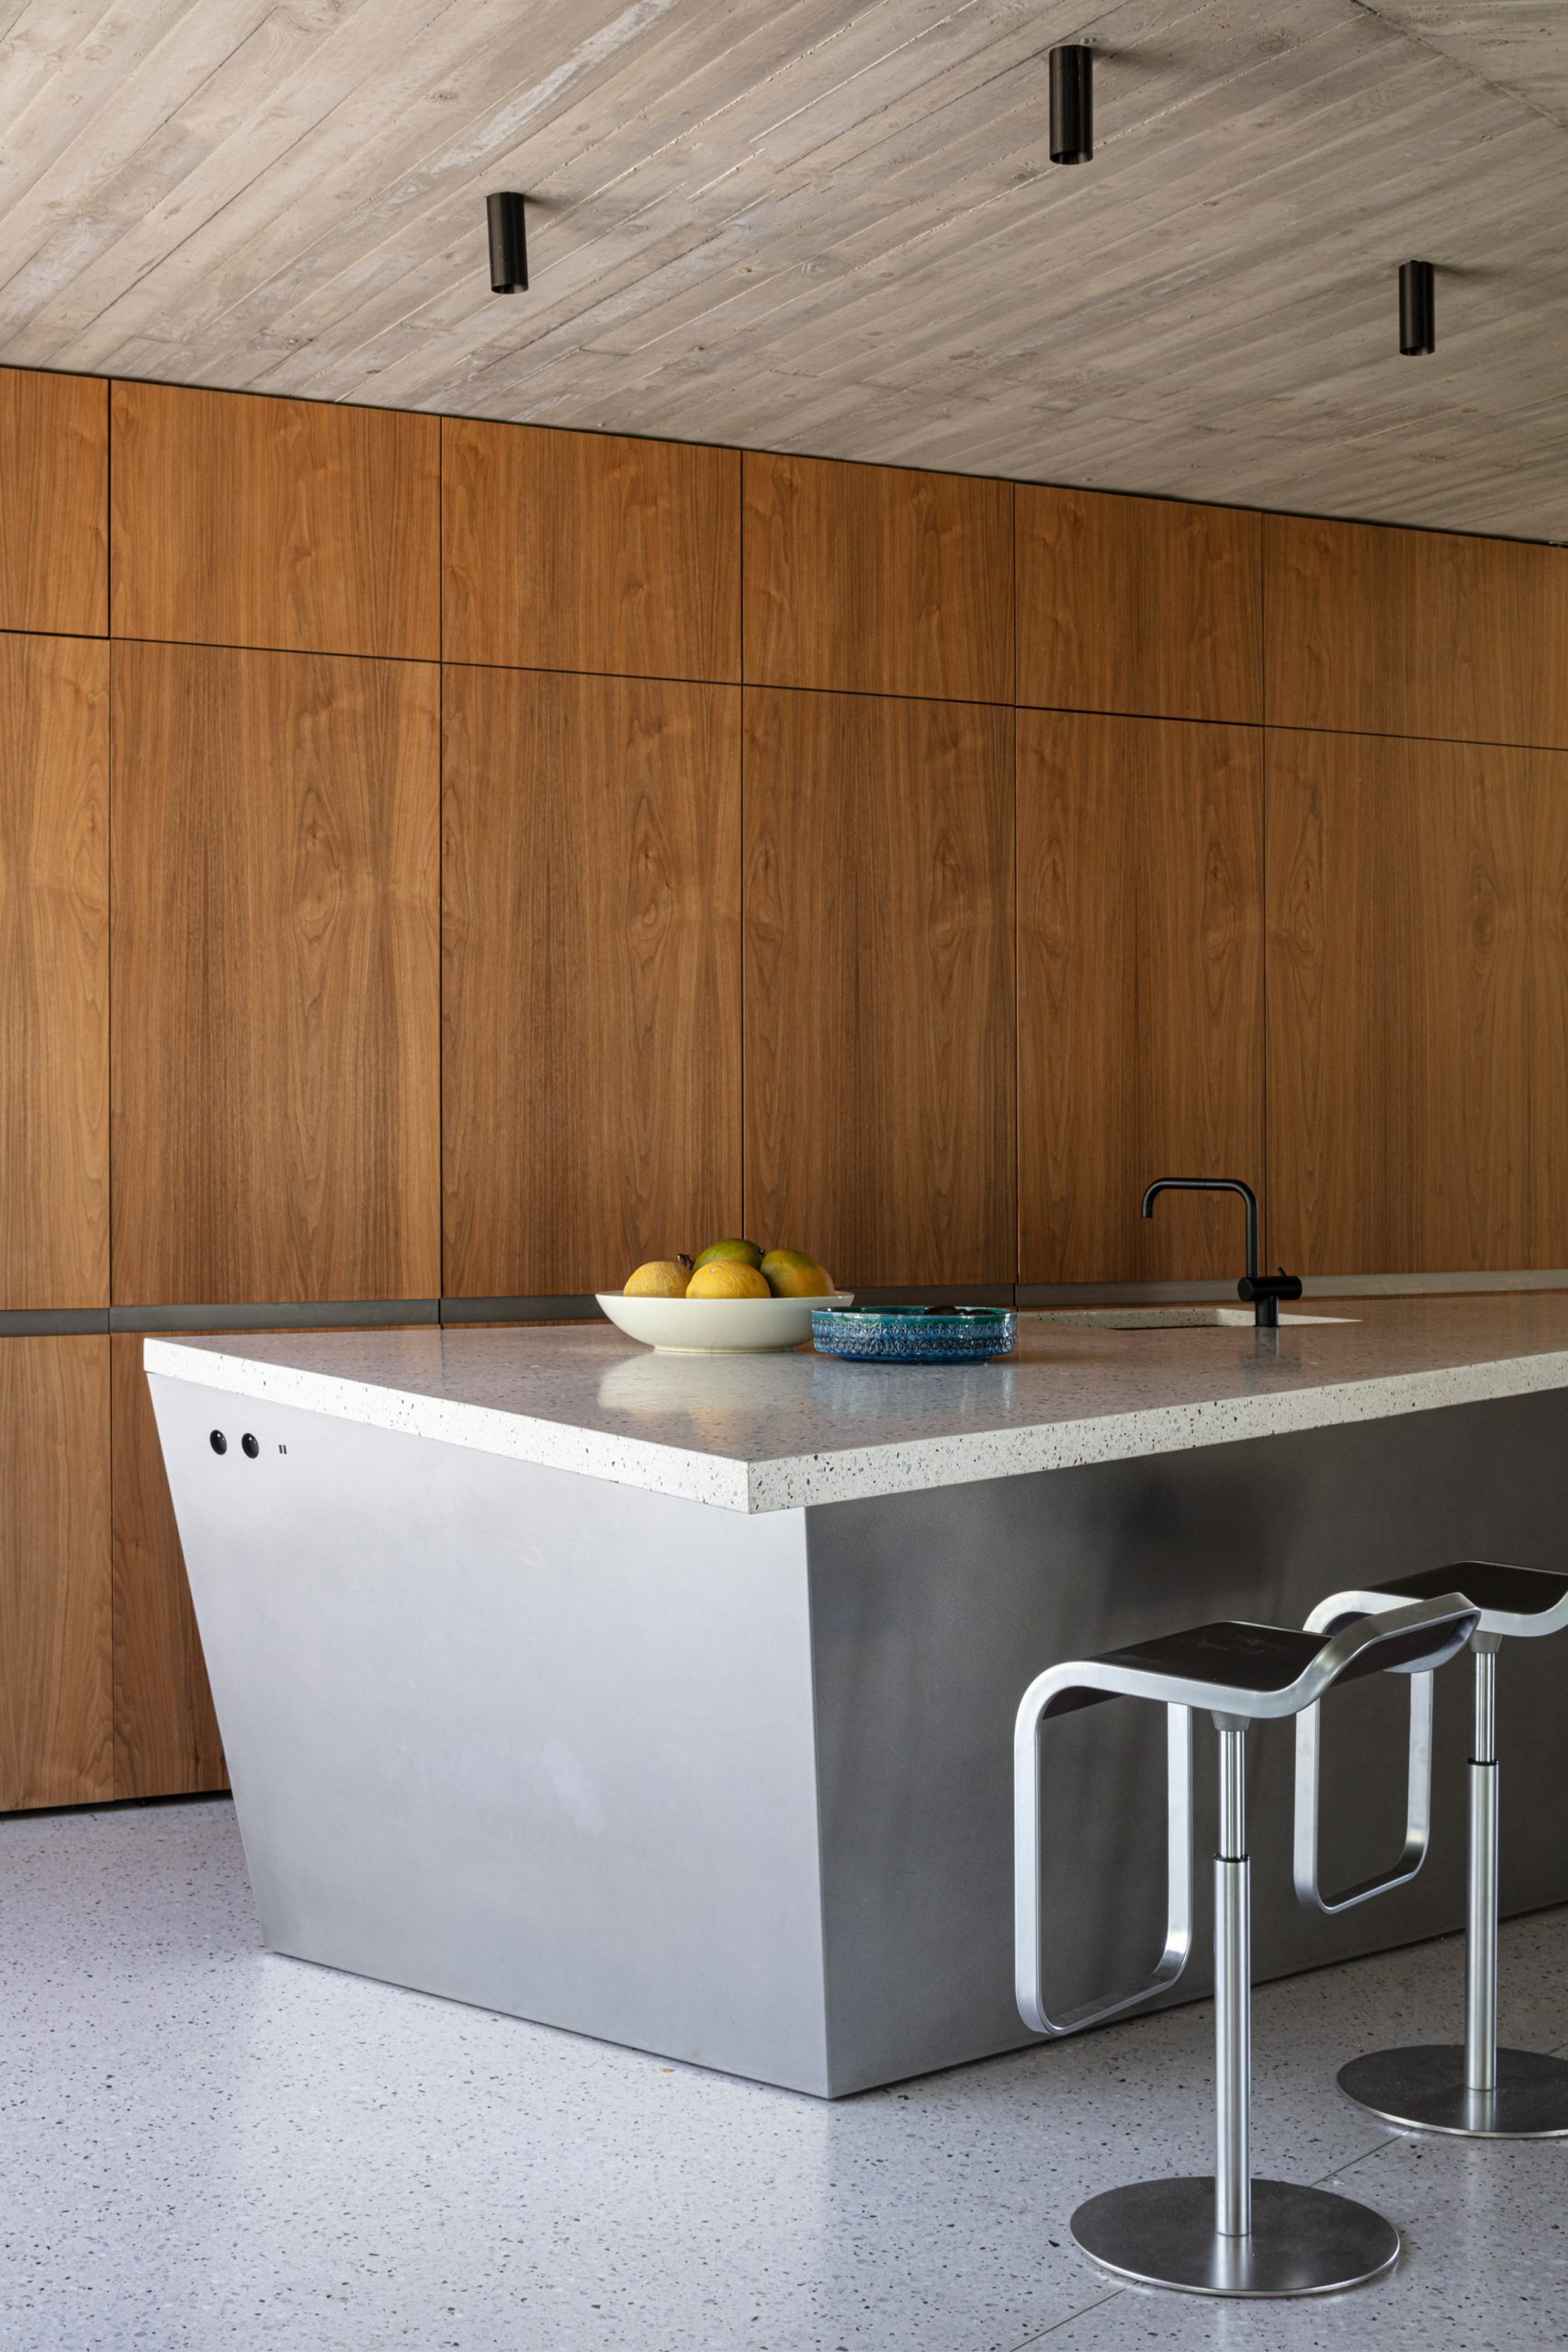 Wood panels line the walls of House Dede's kitchen